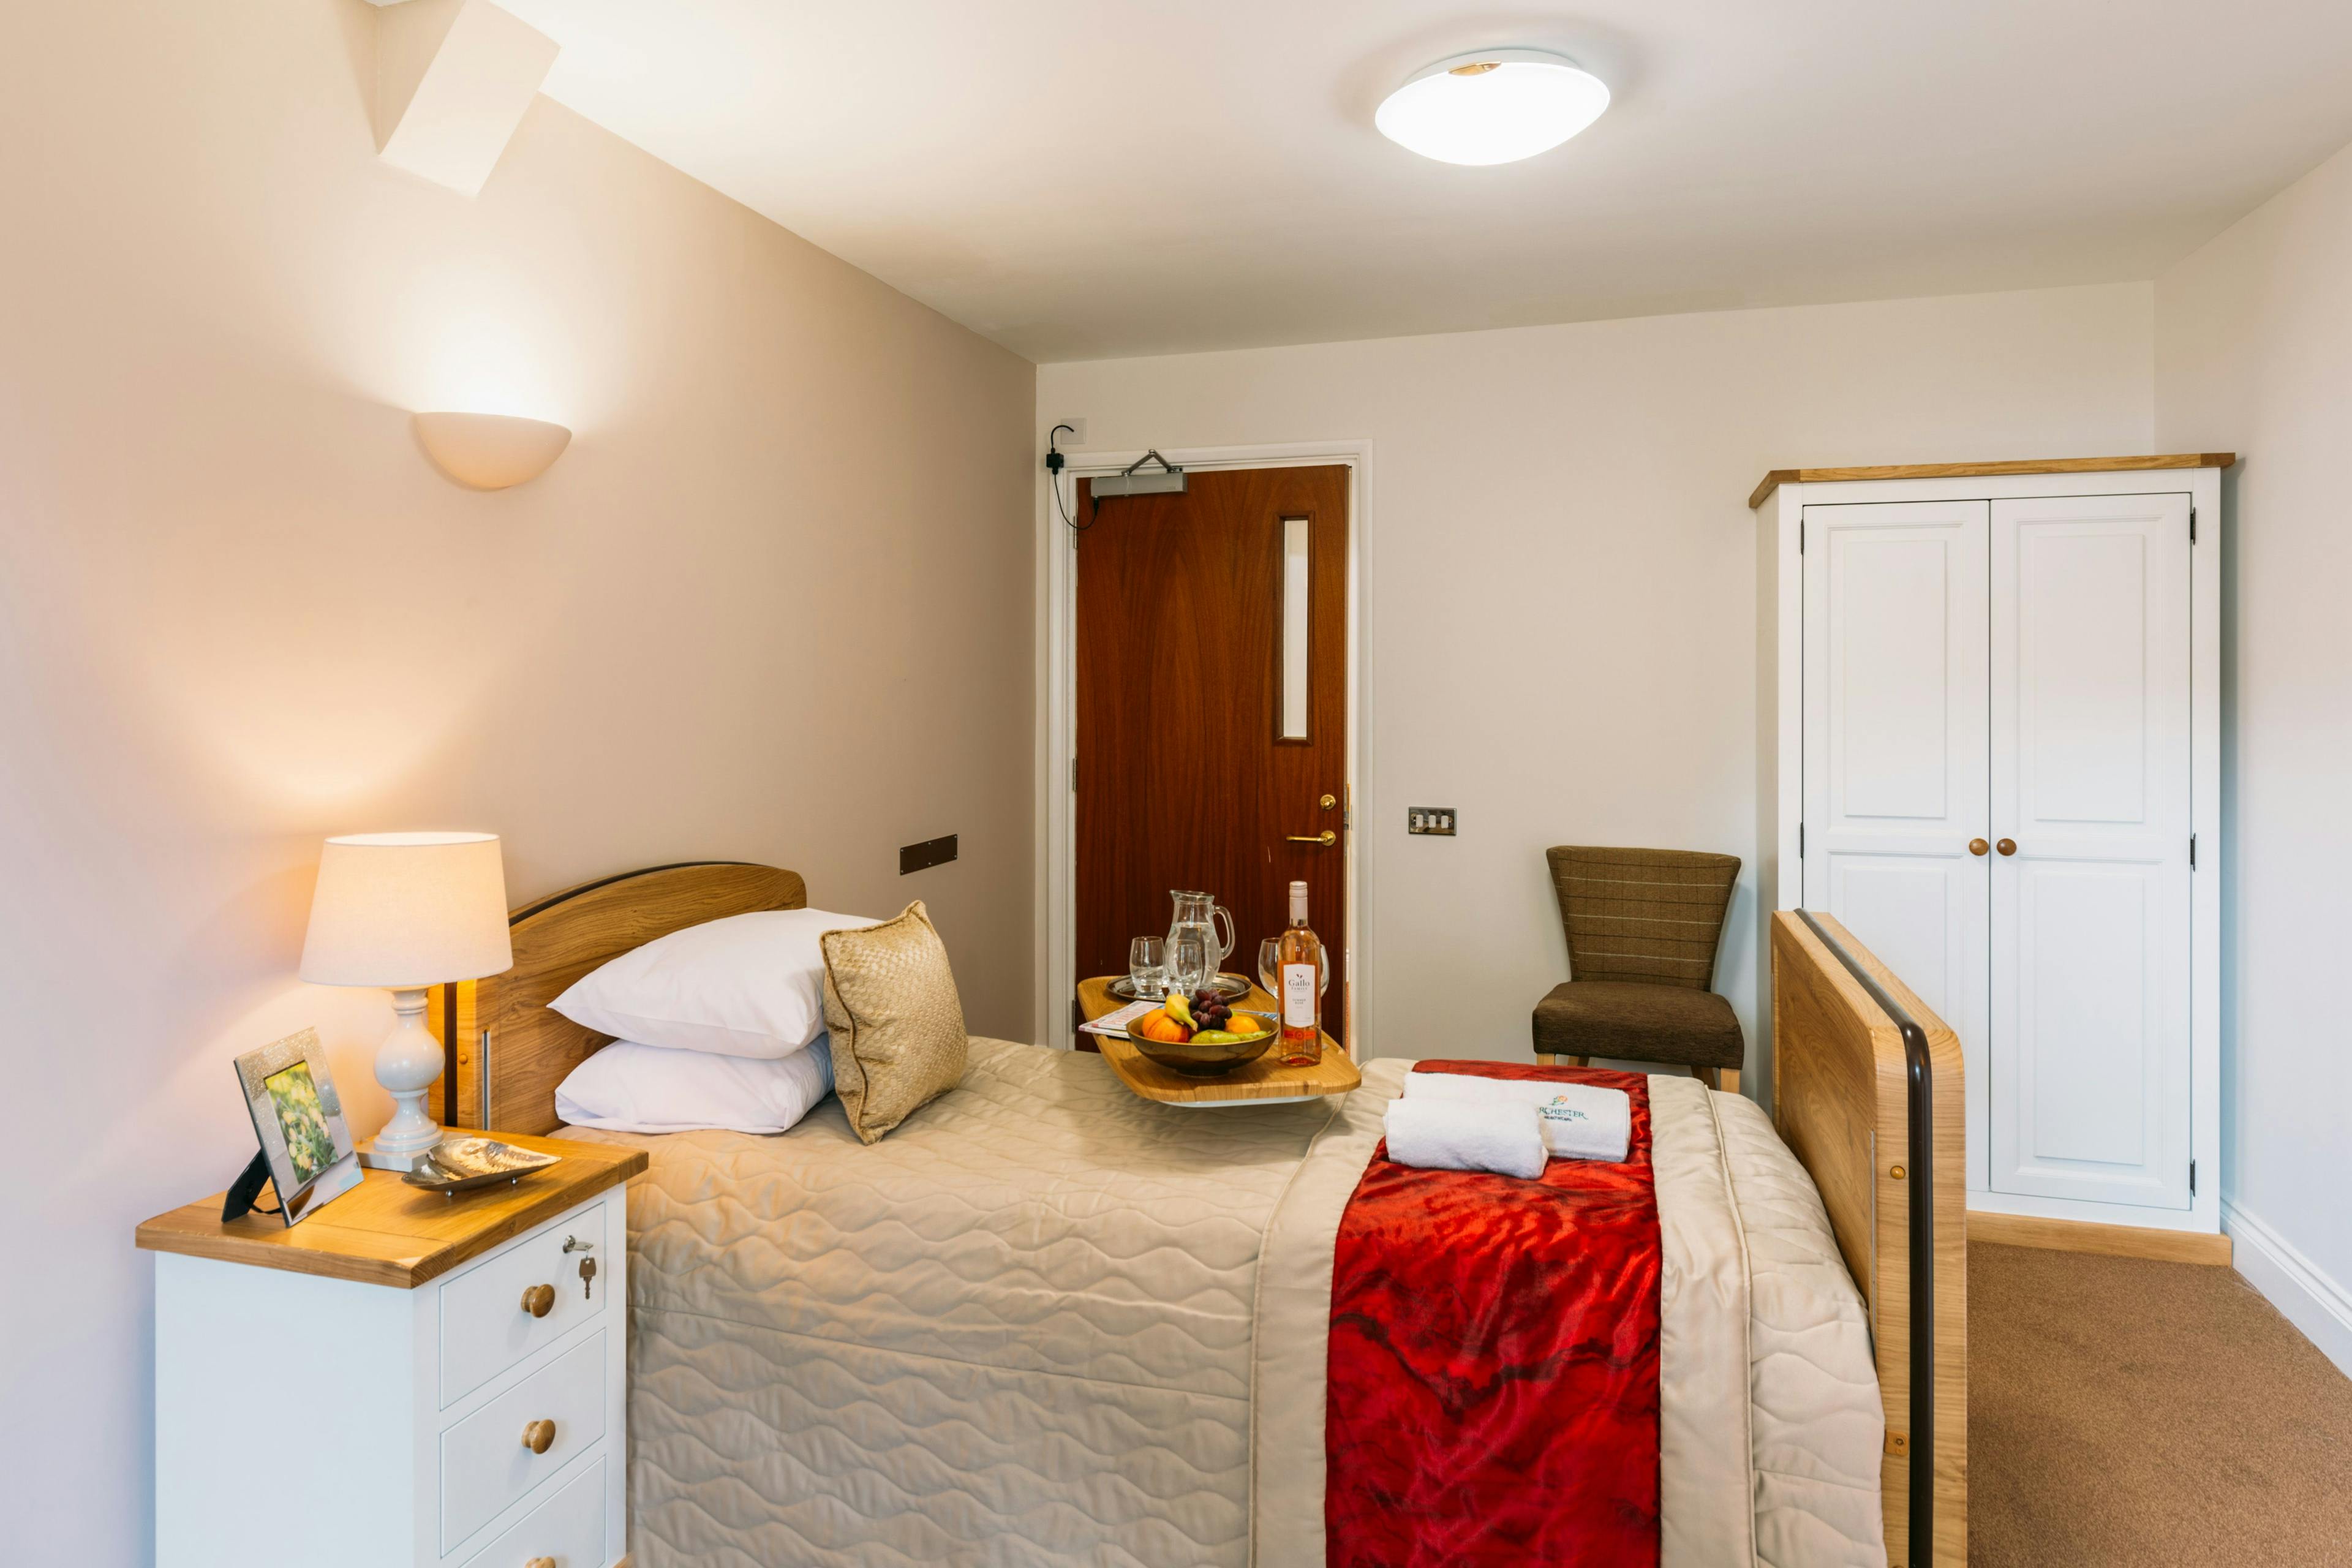 Bedroom in Orchard House Care Home in Newport, Isle of Wight